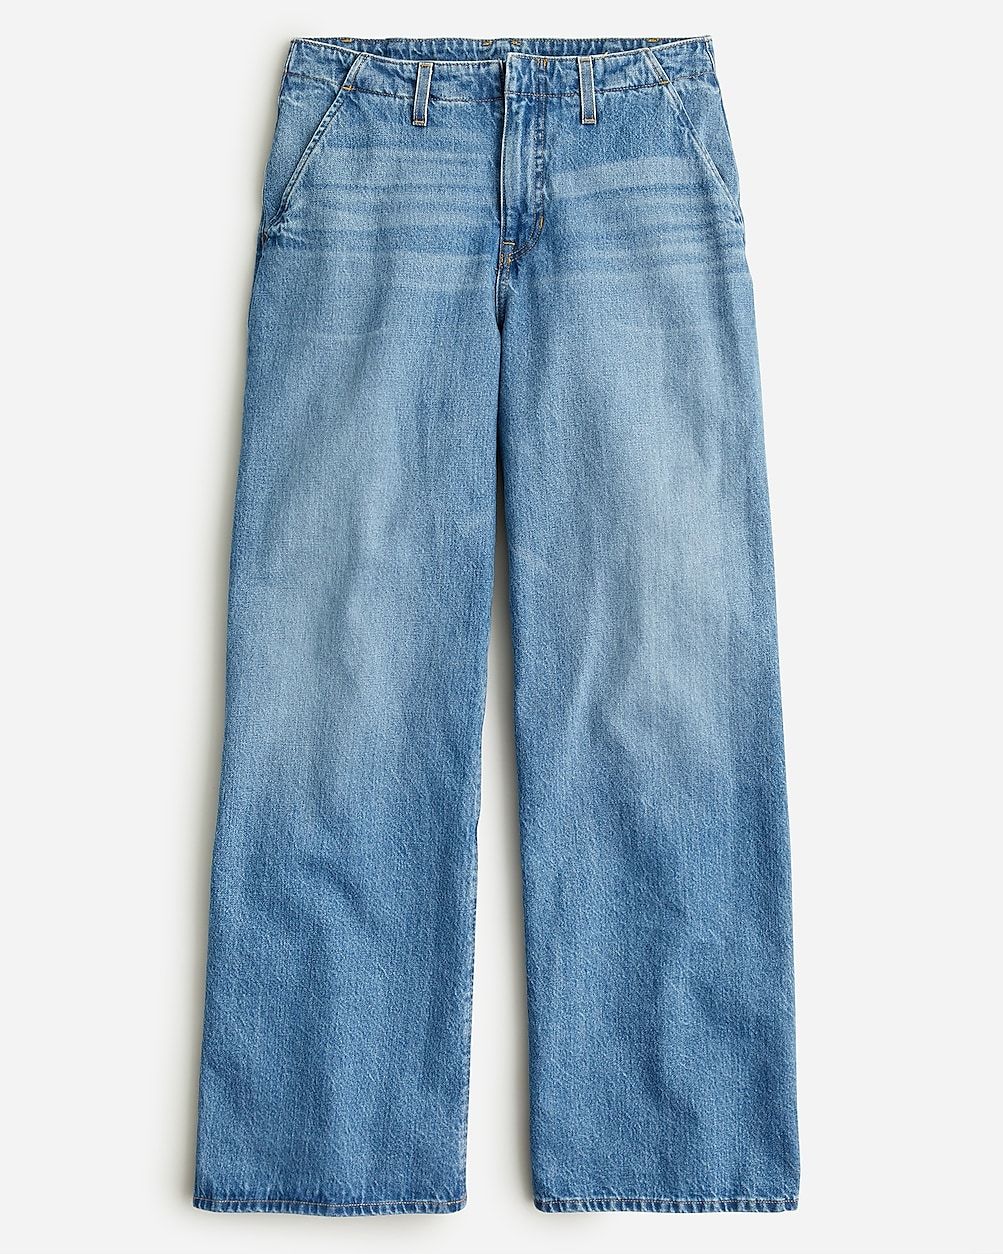 Limited-edition Point Sur puddle jean in Charlotte wash | J.Crew US